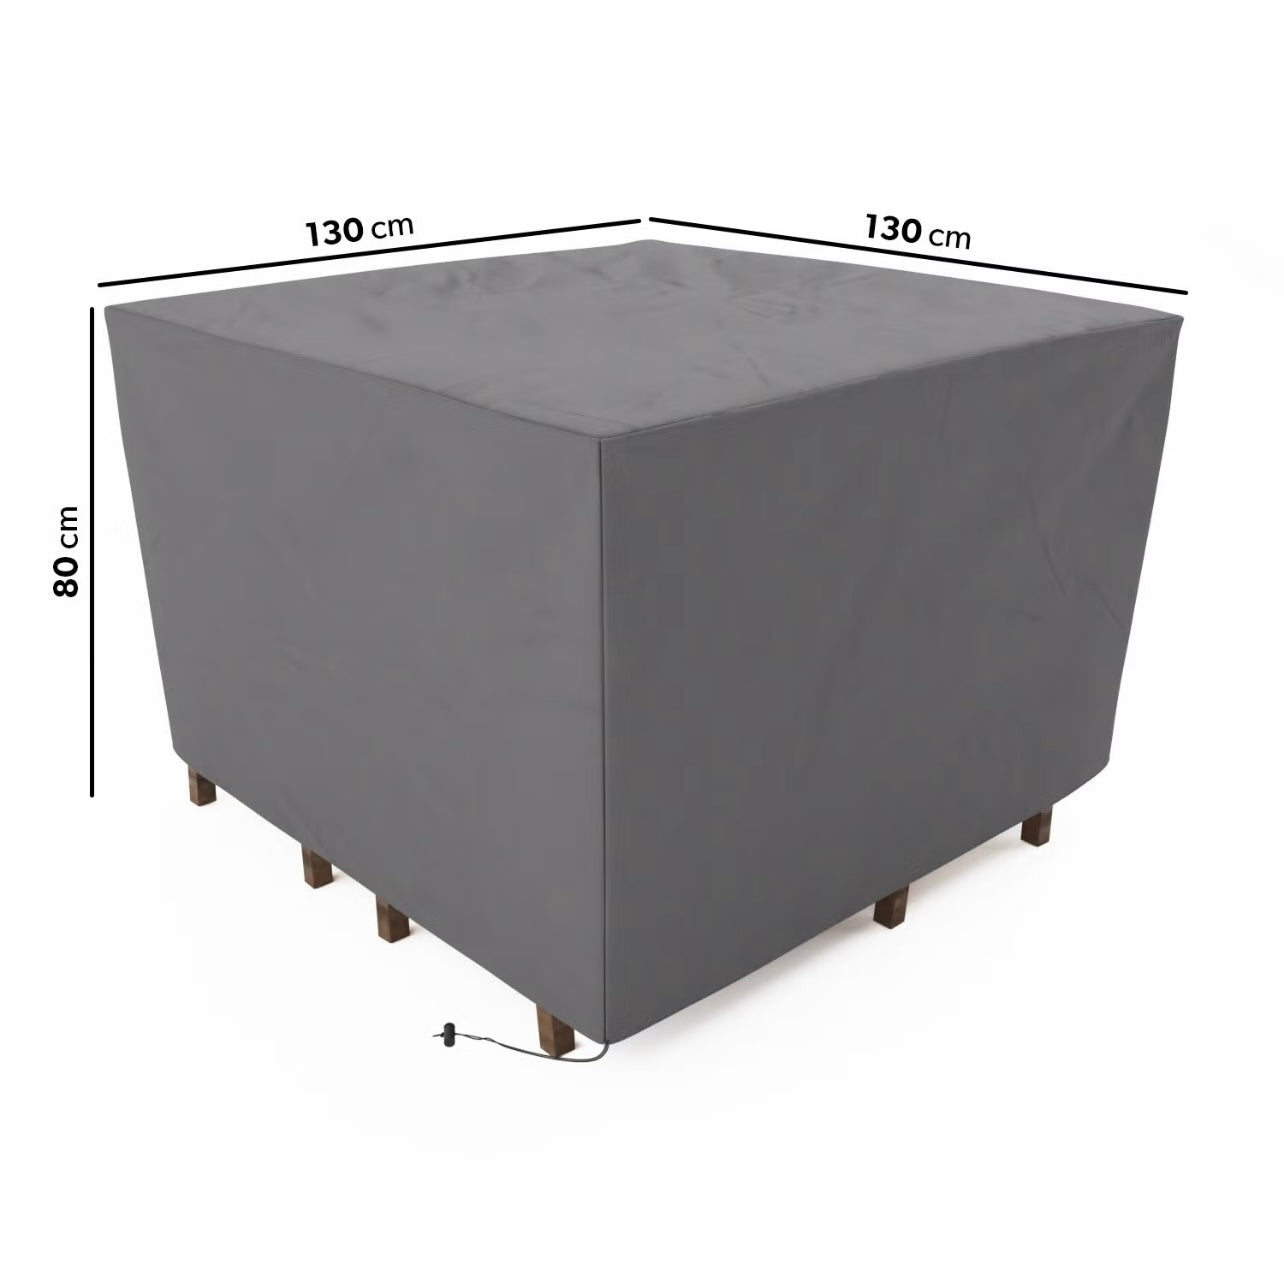 Water Resistant Outdoor Furniture Cover